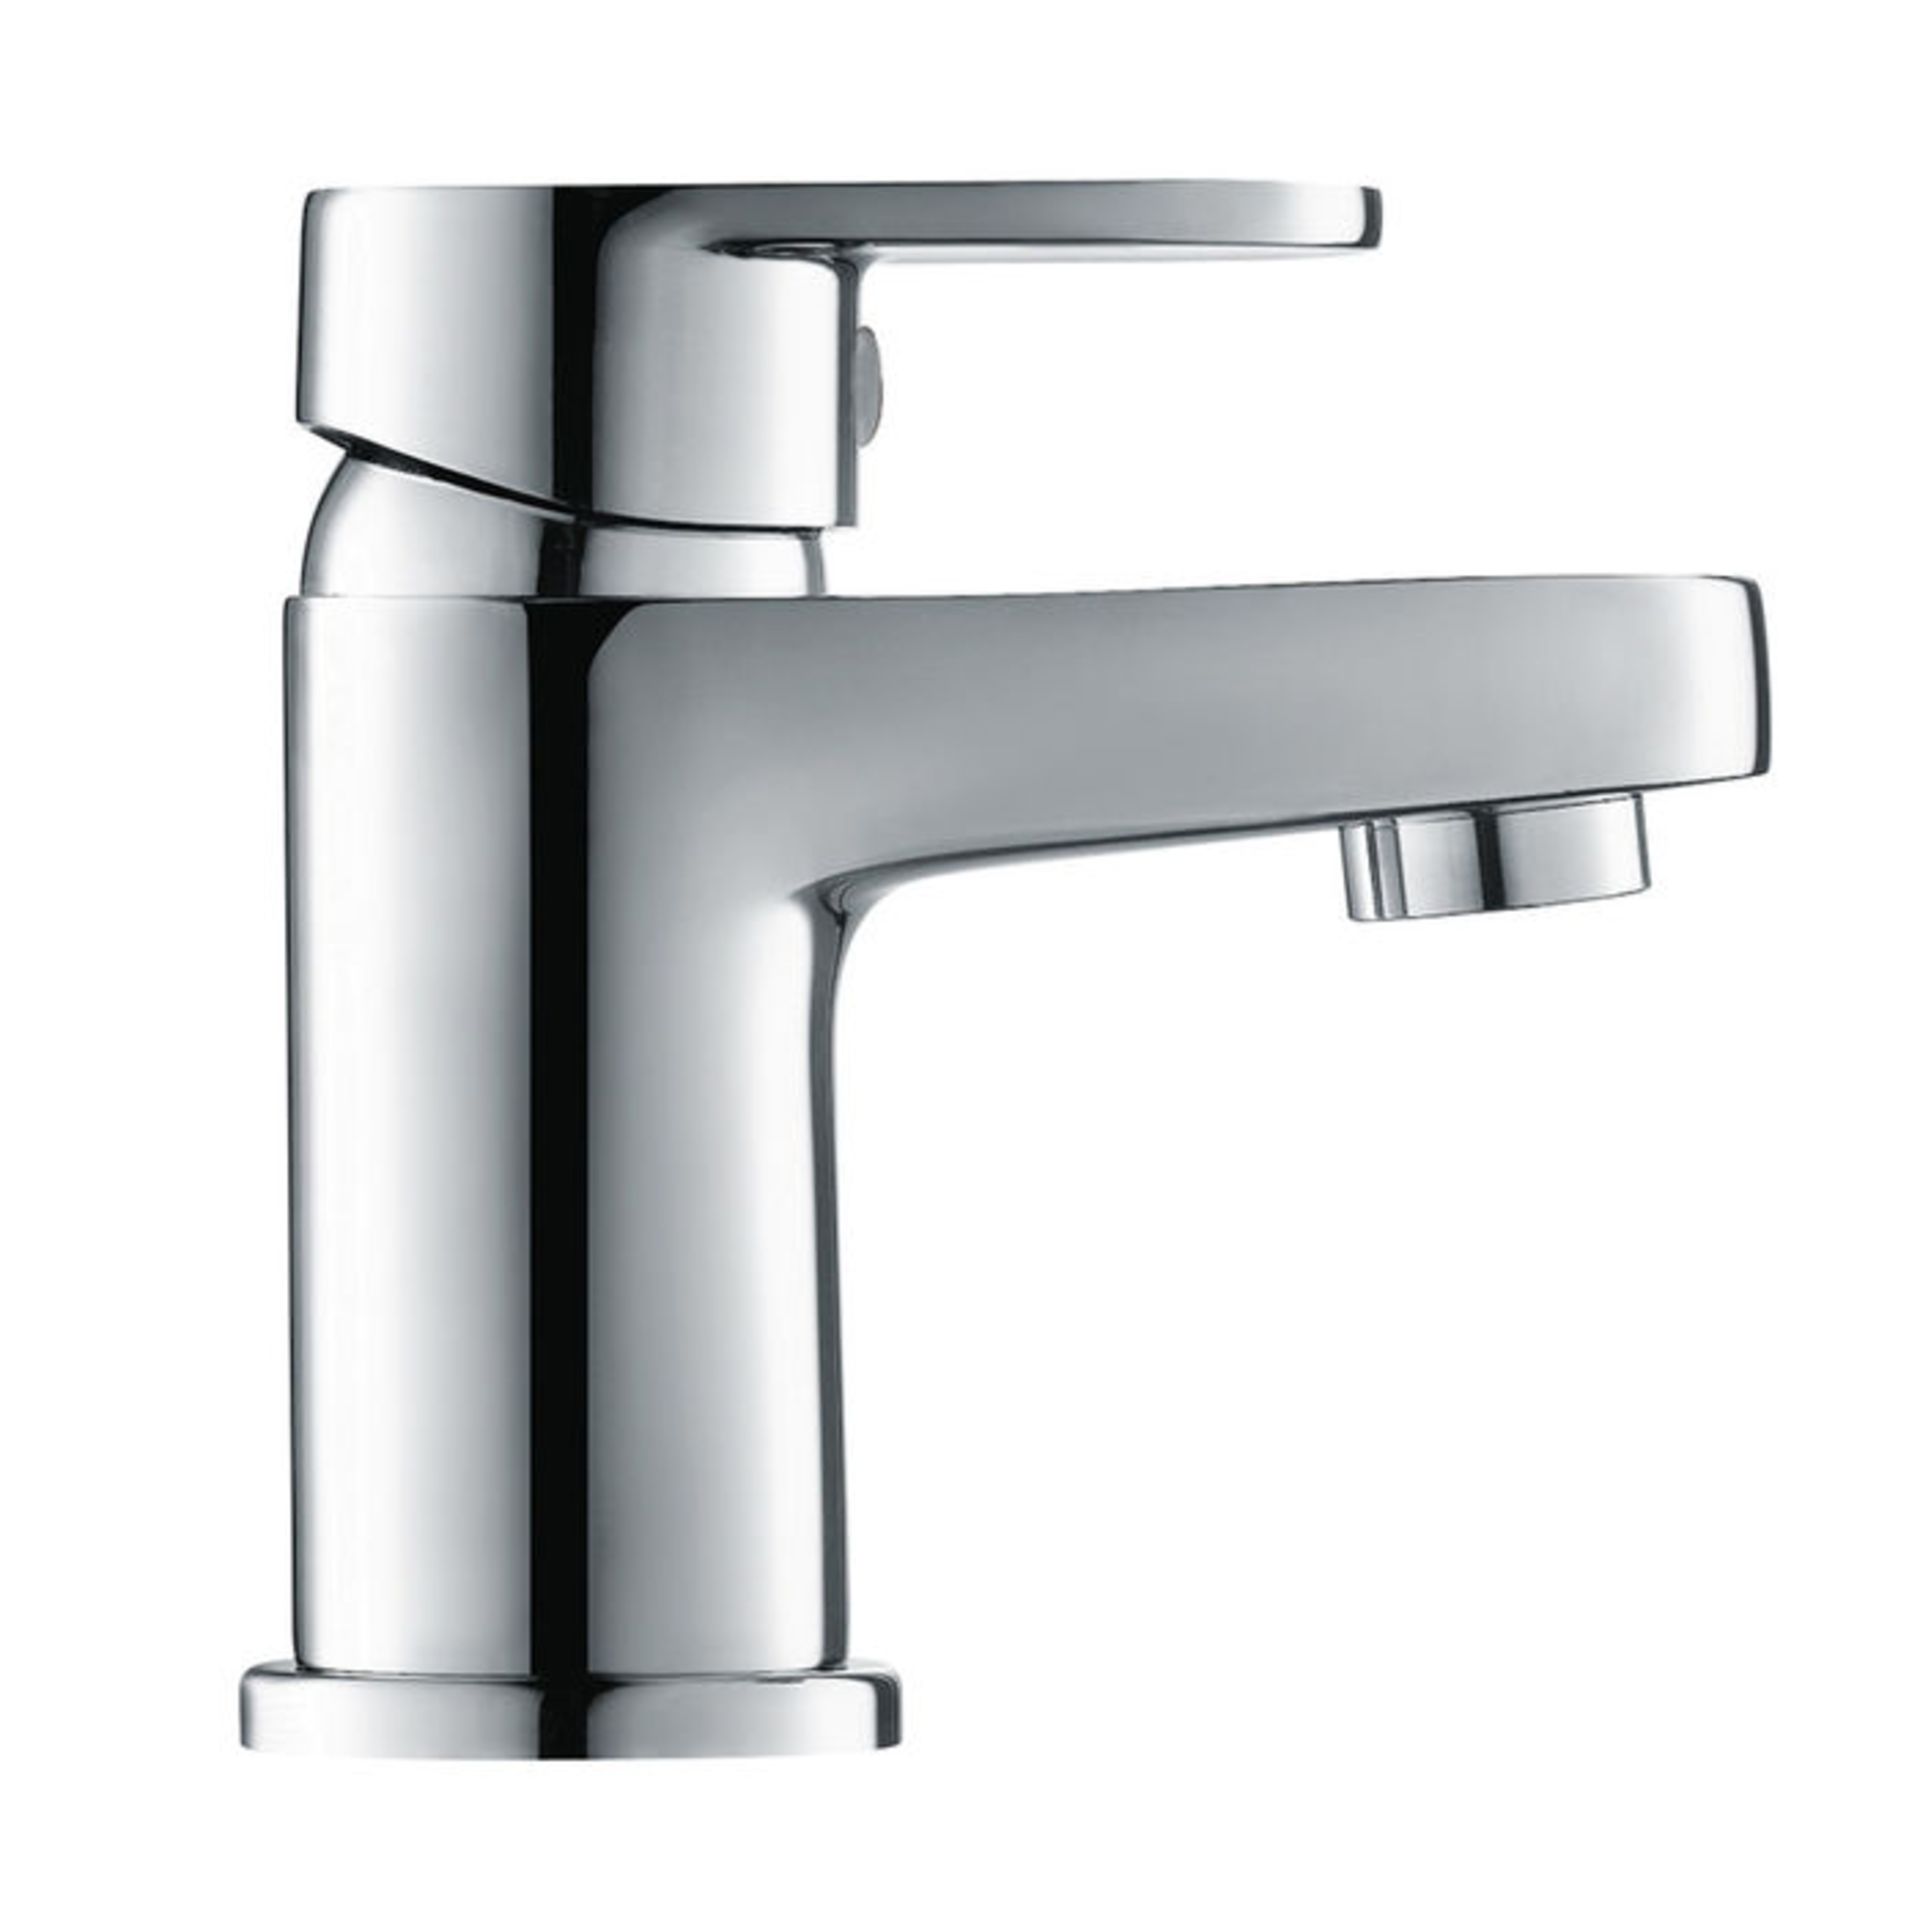 (M1056) Boll Mono Sink Mixer Tap - Cloakroom Chrome Plated Solid Brass Mixer cartridge Minim... - Image 2 of 3